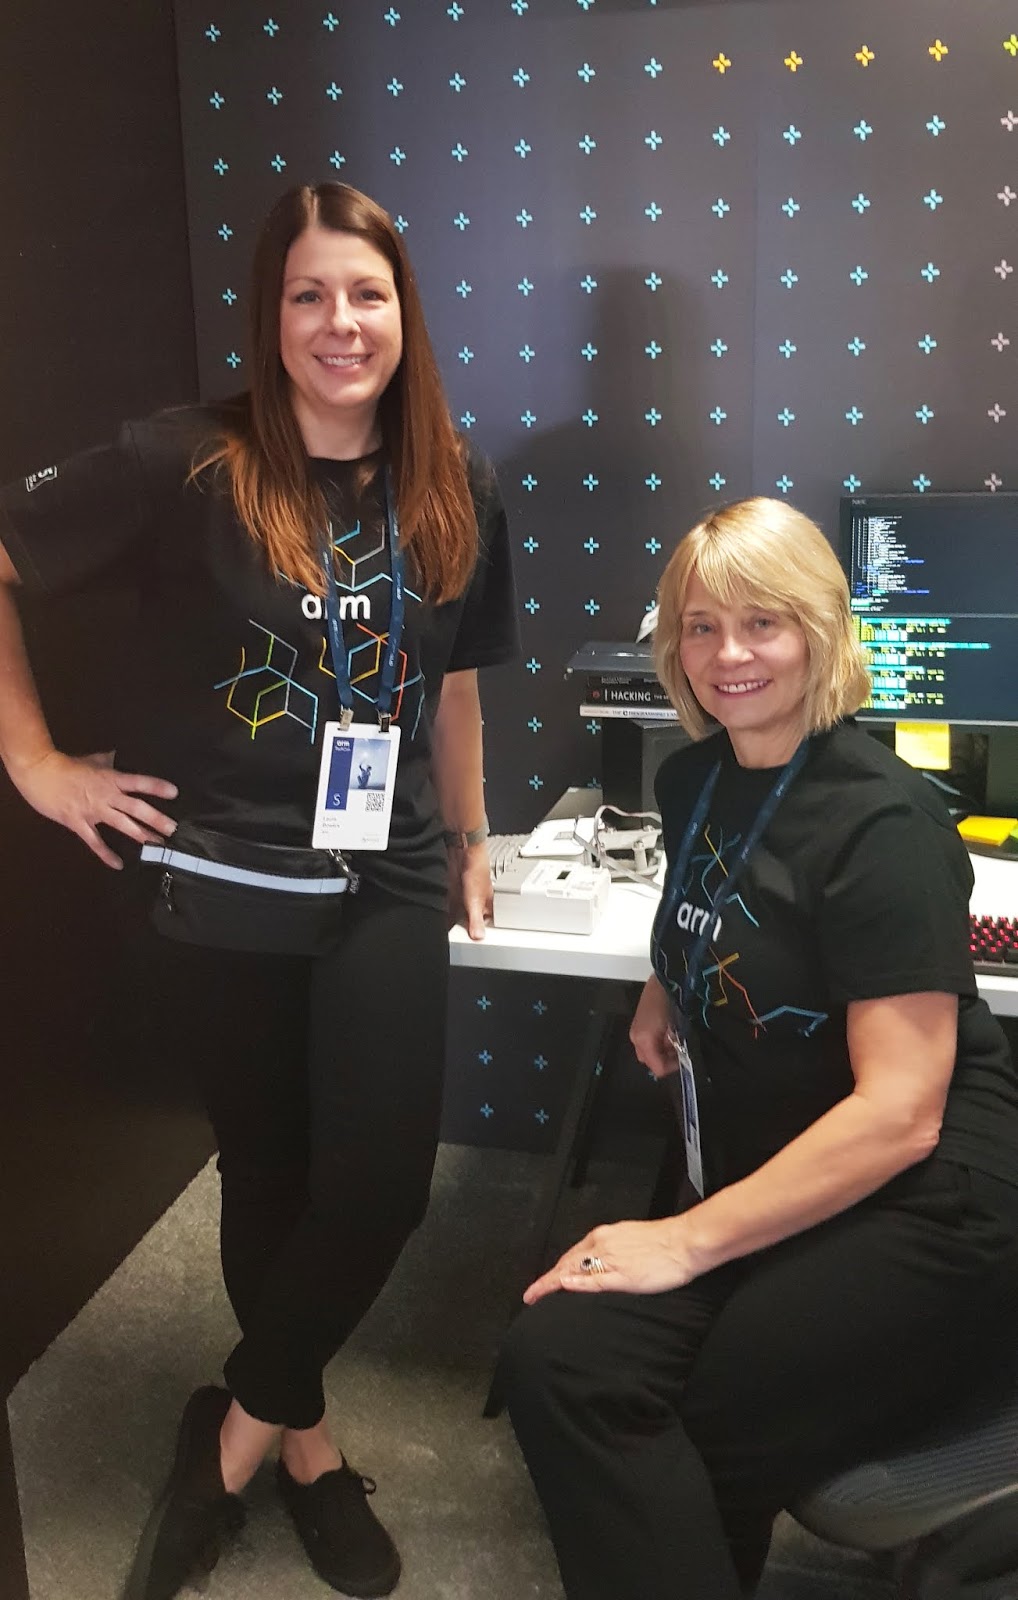 Style blogger Gail Hanlon with a colleague on the Arm booth at Arm TechCon in San Jose, California